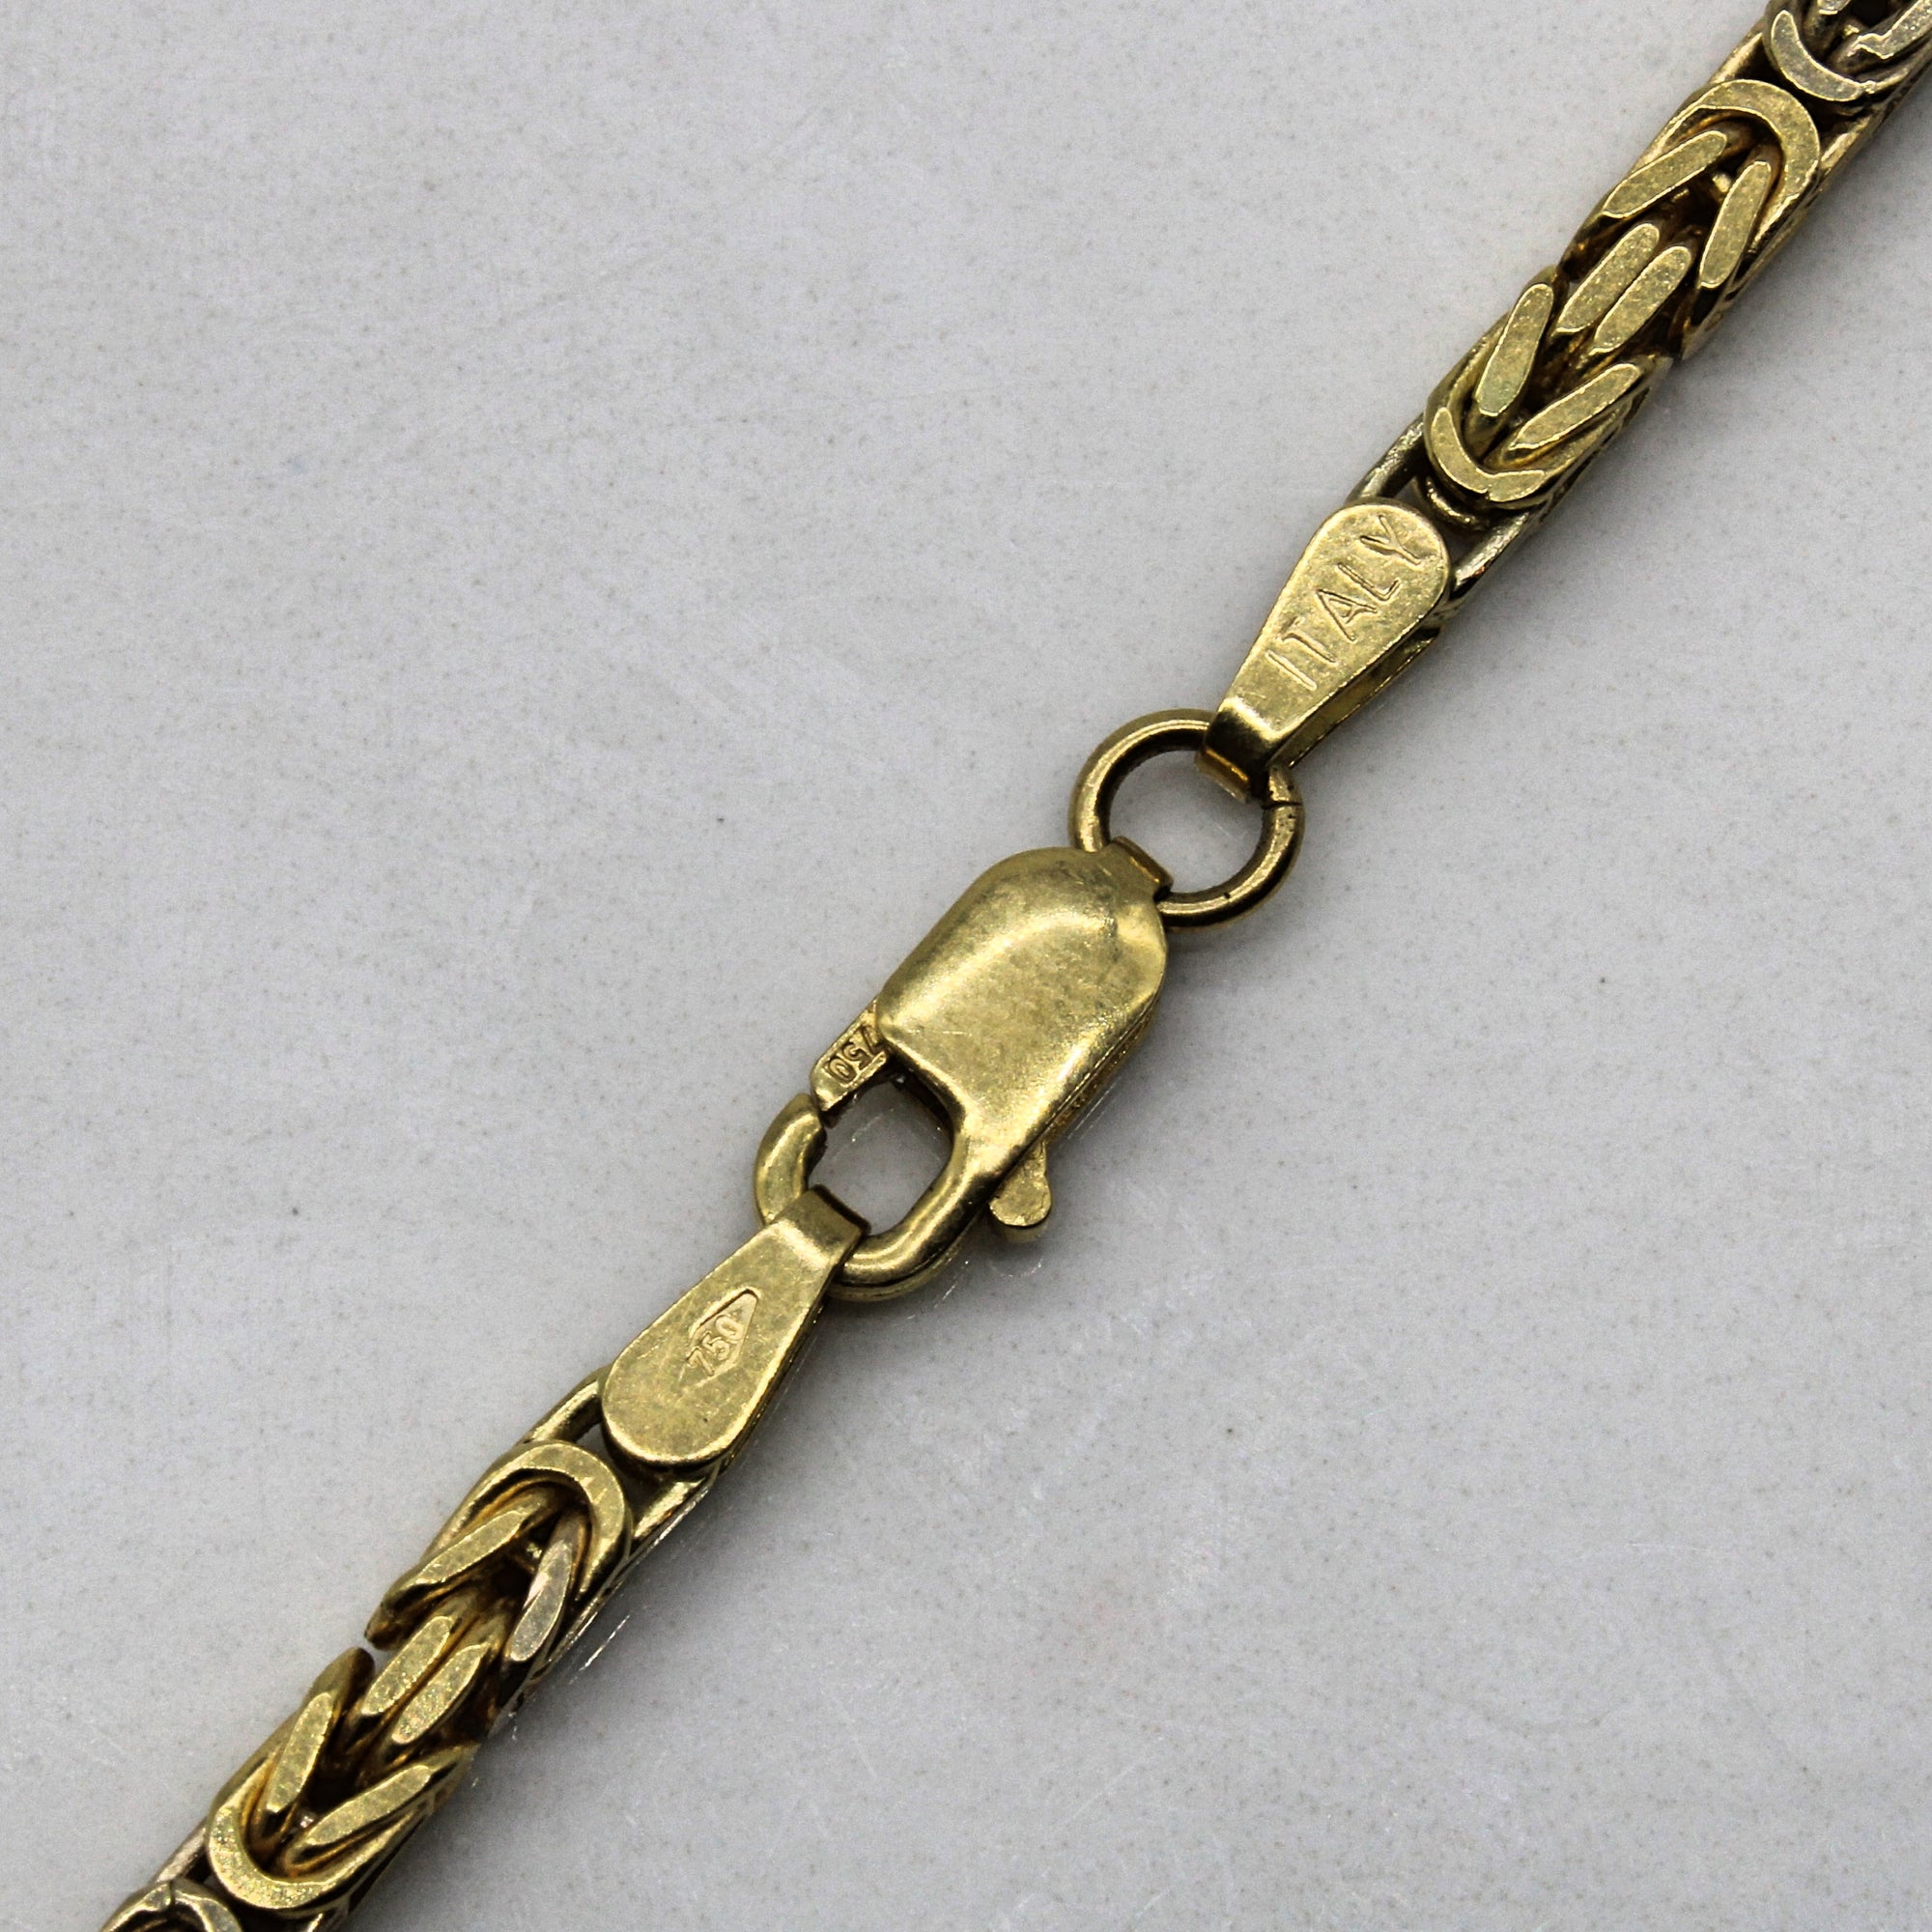 18k Two Tone Gold Birdcage Chain | 23